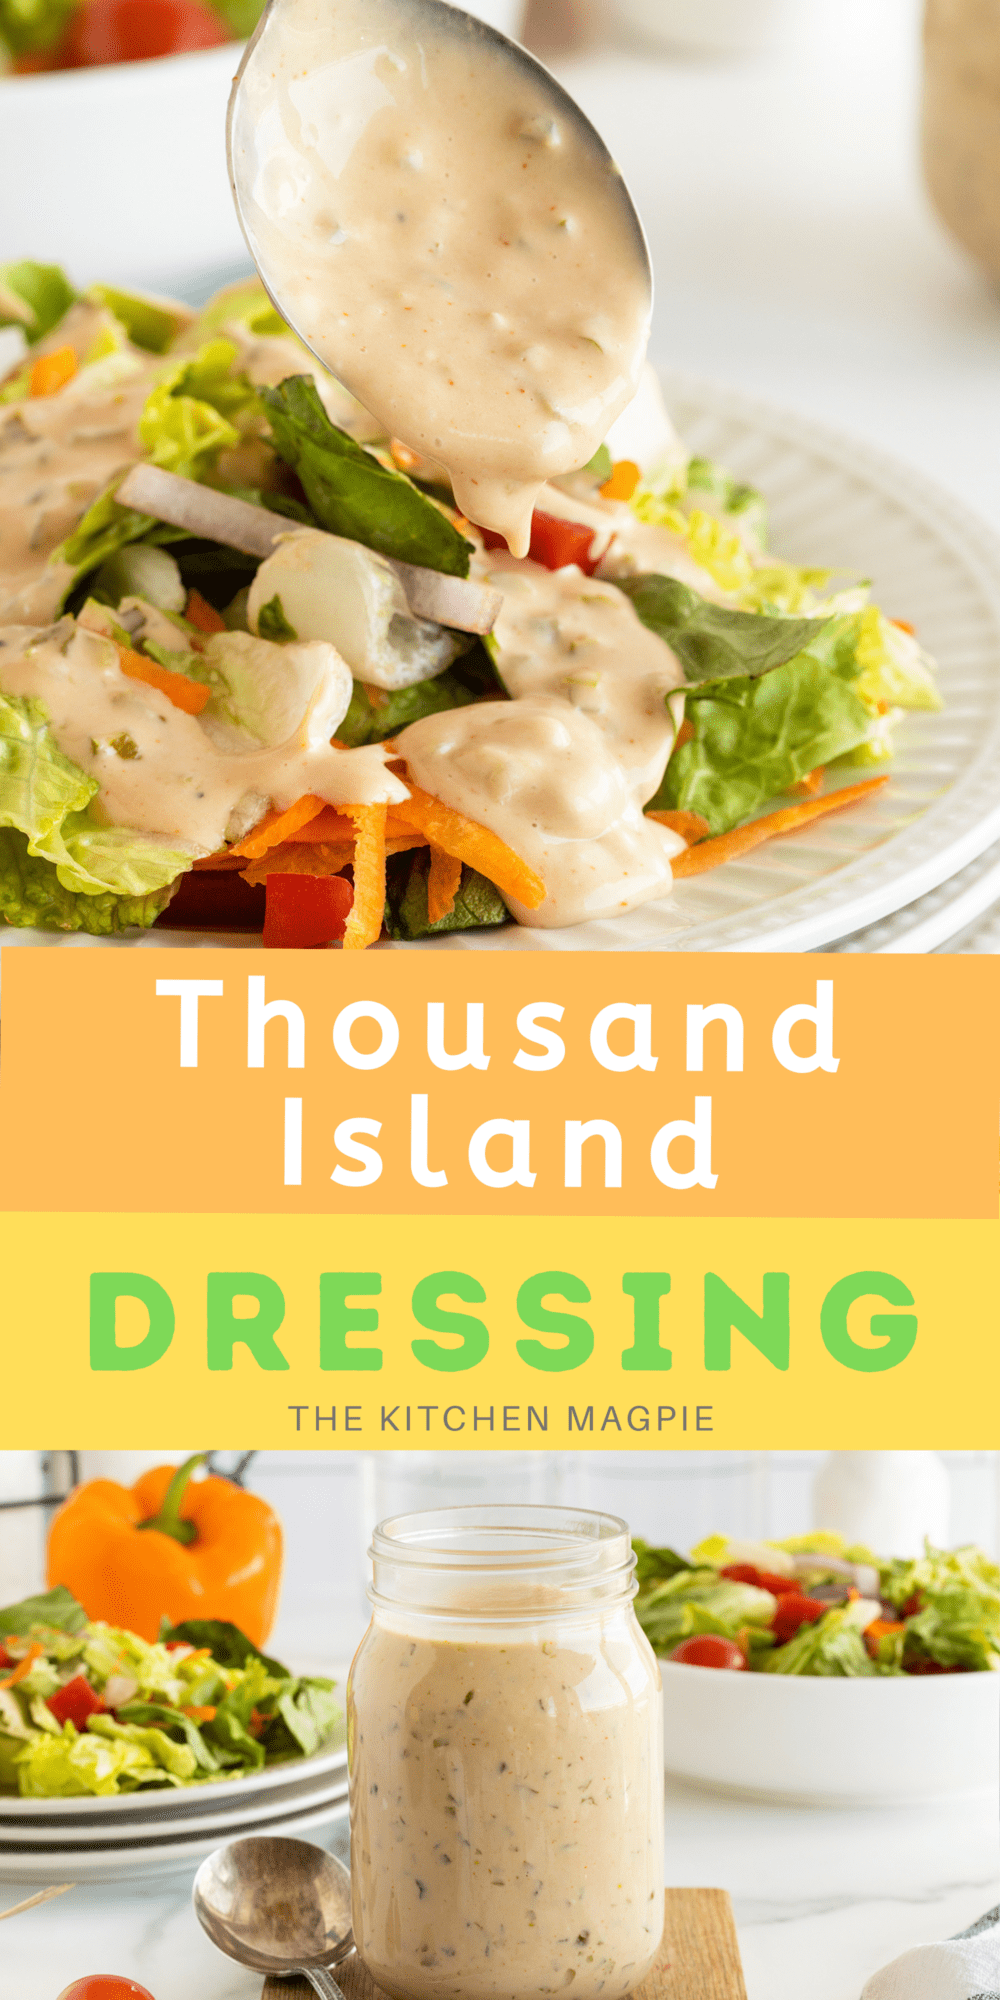 An absolute classic dressing that few people really make anymore, Thousand Island deserves a place in every kitchen.